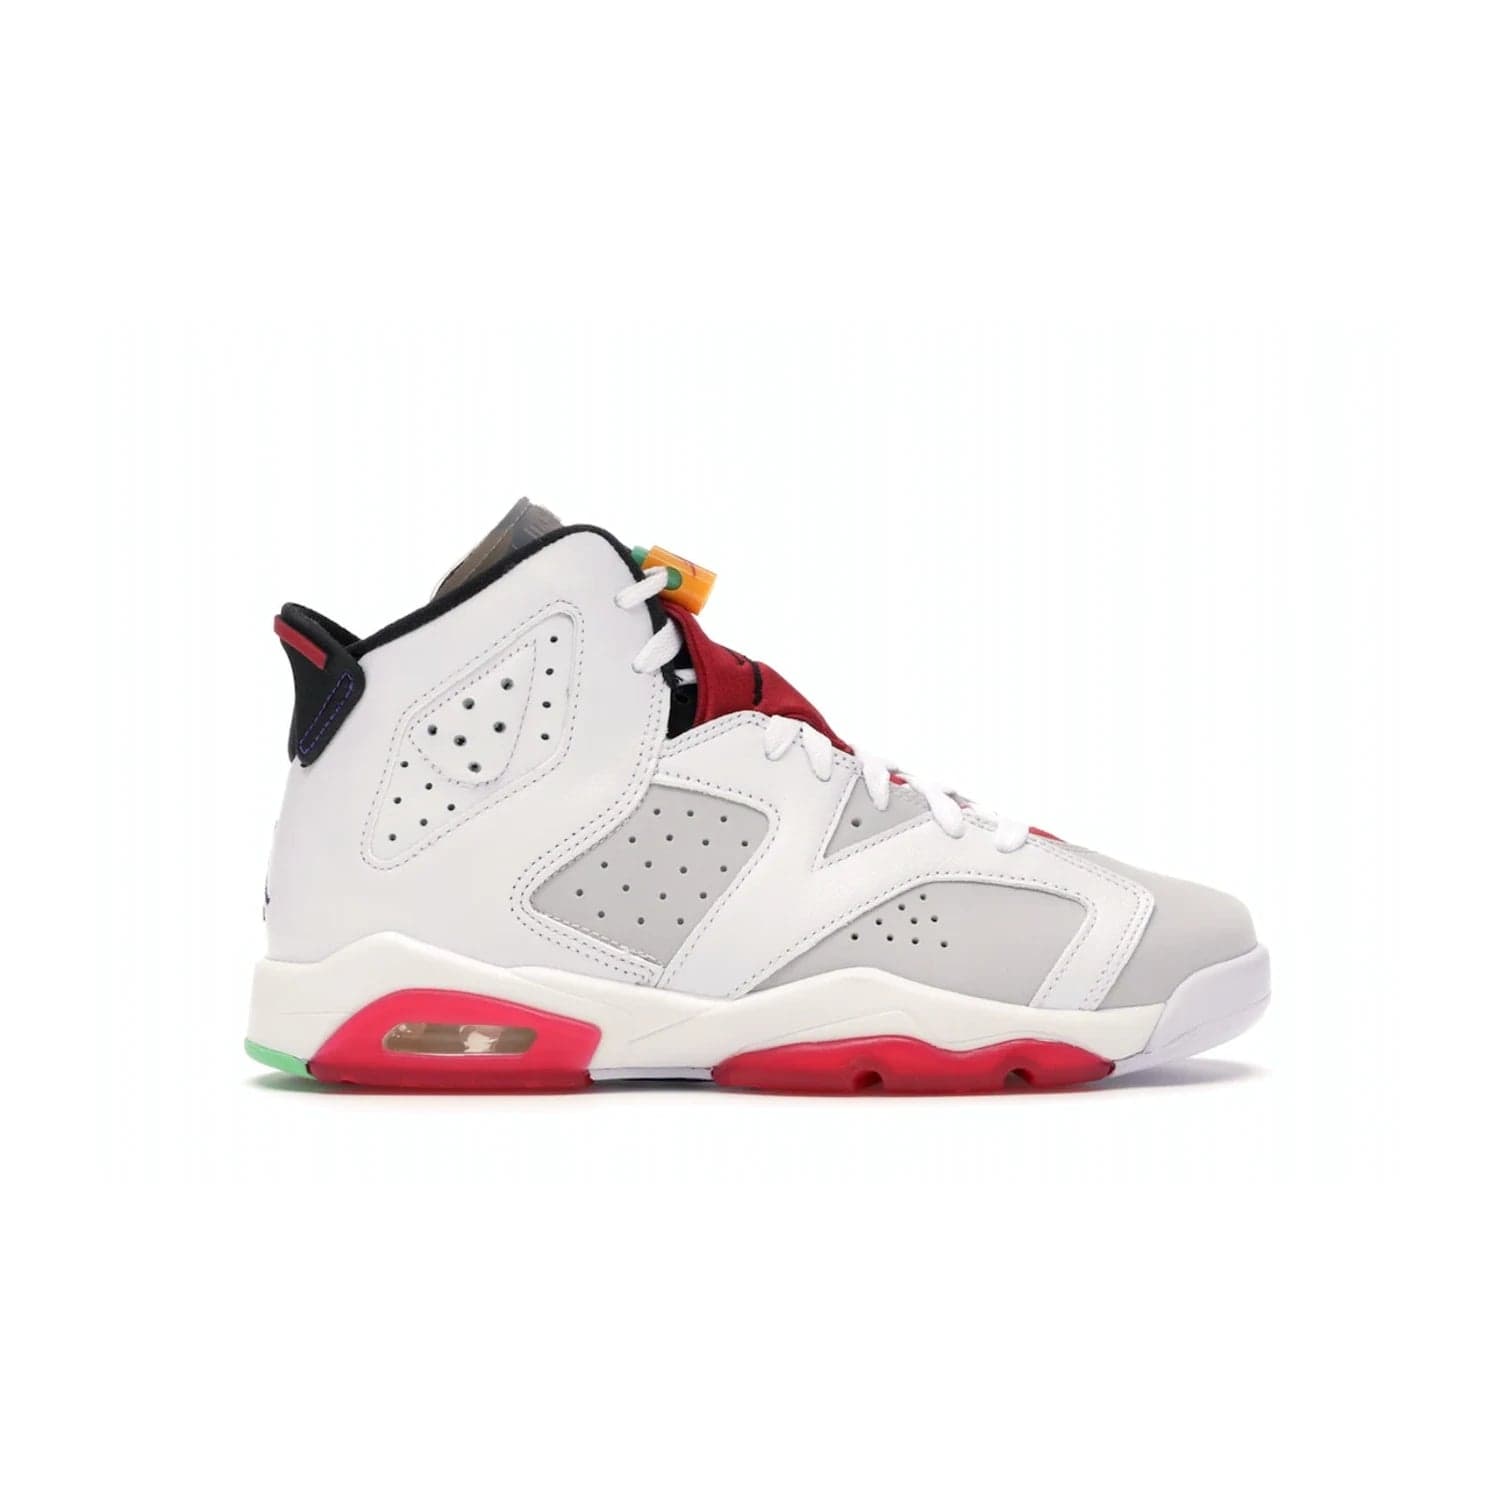 Jordan 6 Retro Hare (GS) - Image 1 - Only at www.BallersClubKickz.com - The Air Jordan 6 Hare GS. Comfortable suede upper, perforations, red pods, two-tone midsole, and signature "Jumpman" emblem. Released 17 June 2020. Perfect for any sneakerhead.